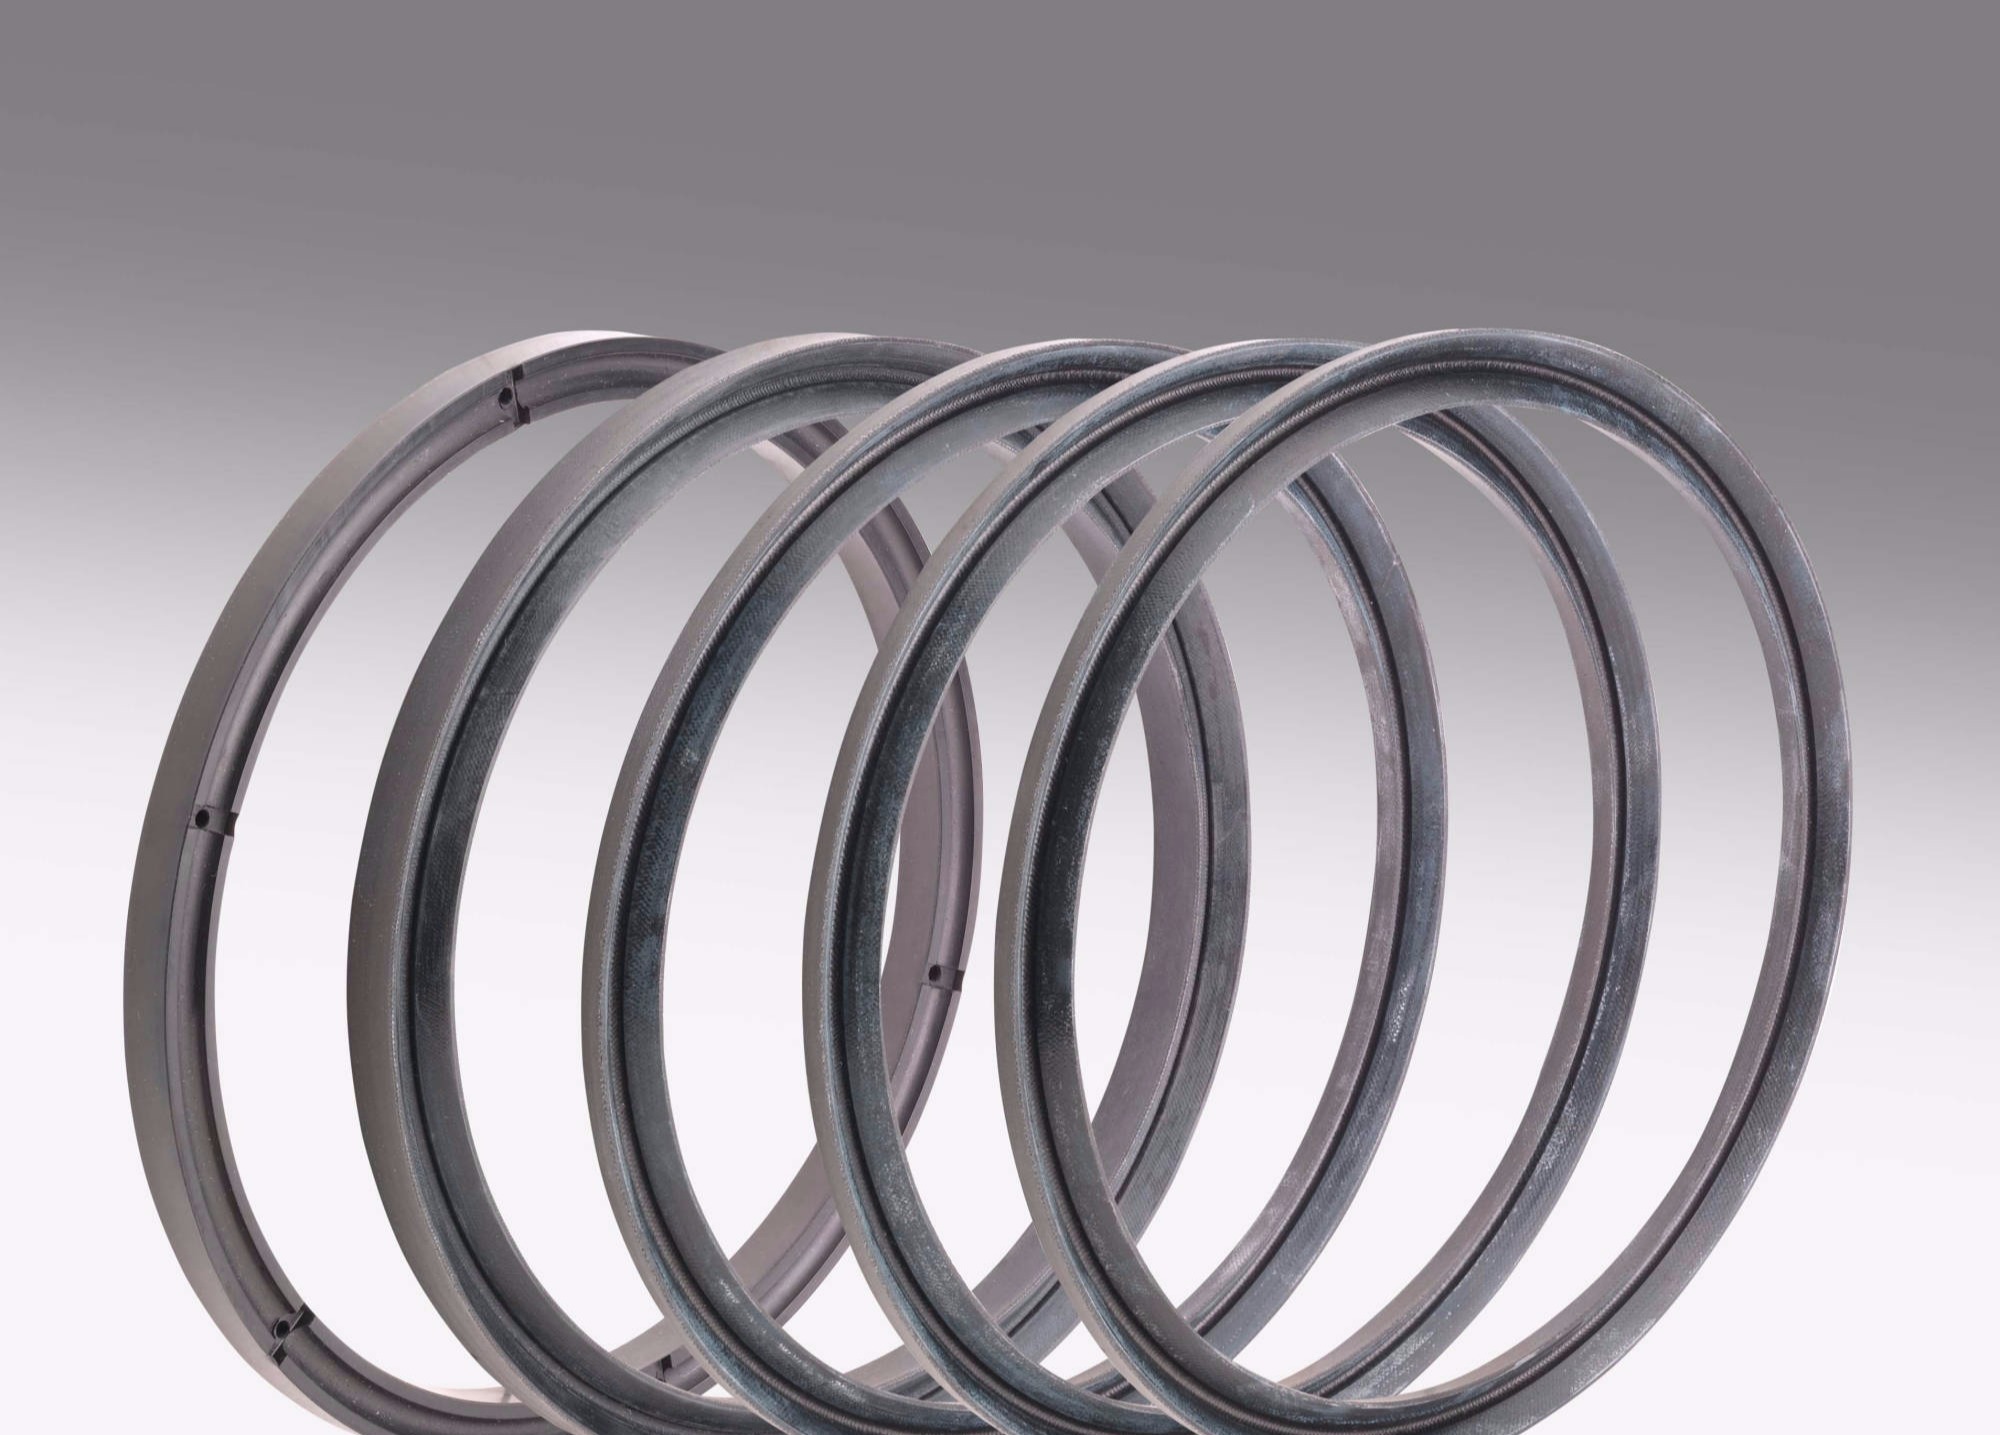 Sealing rings and Technical items